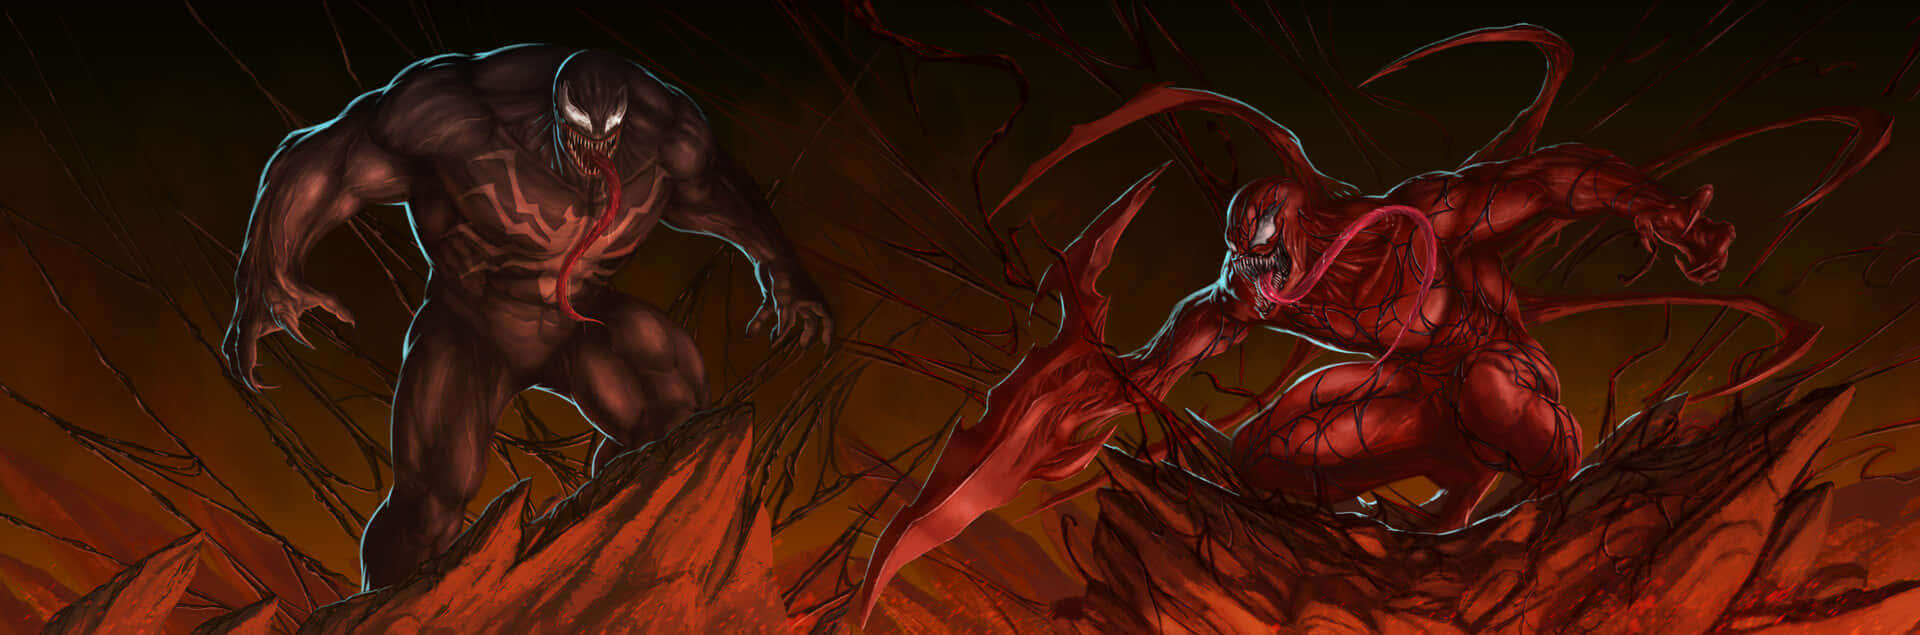 "A spectacularly Superhuman Showdown between Venom and Carnage!" Wallpaper